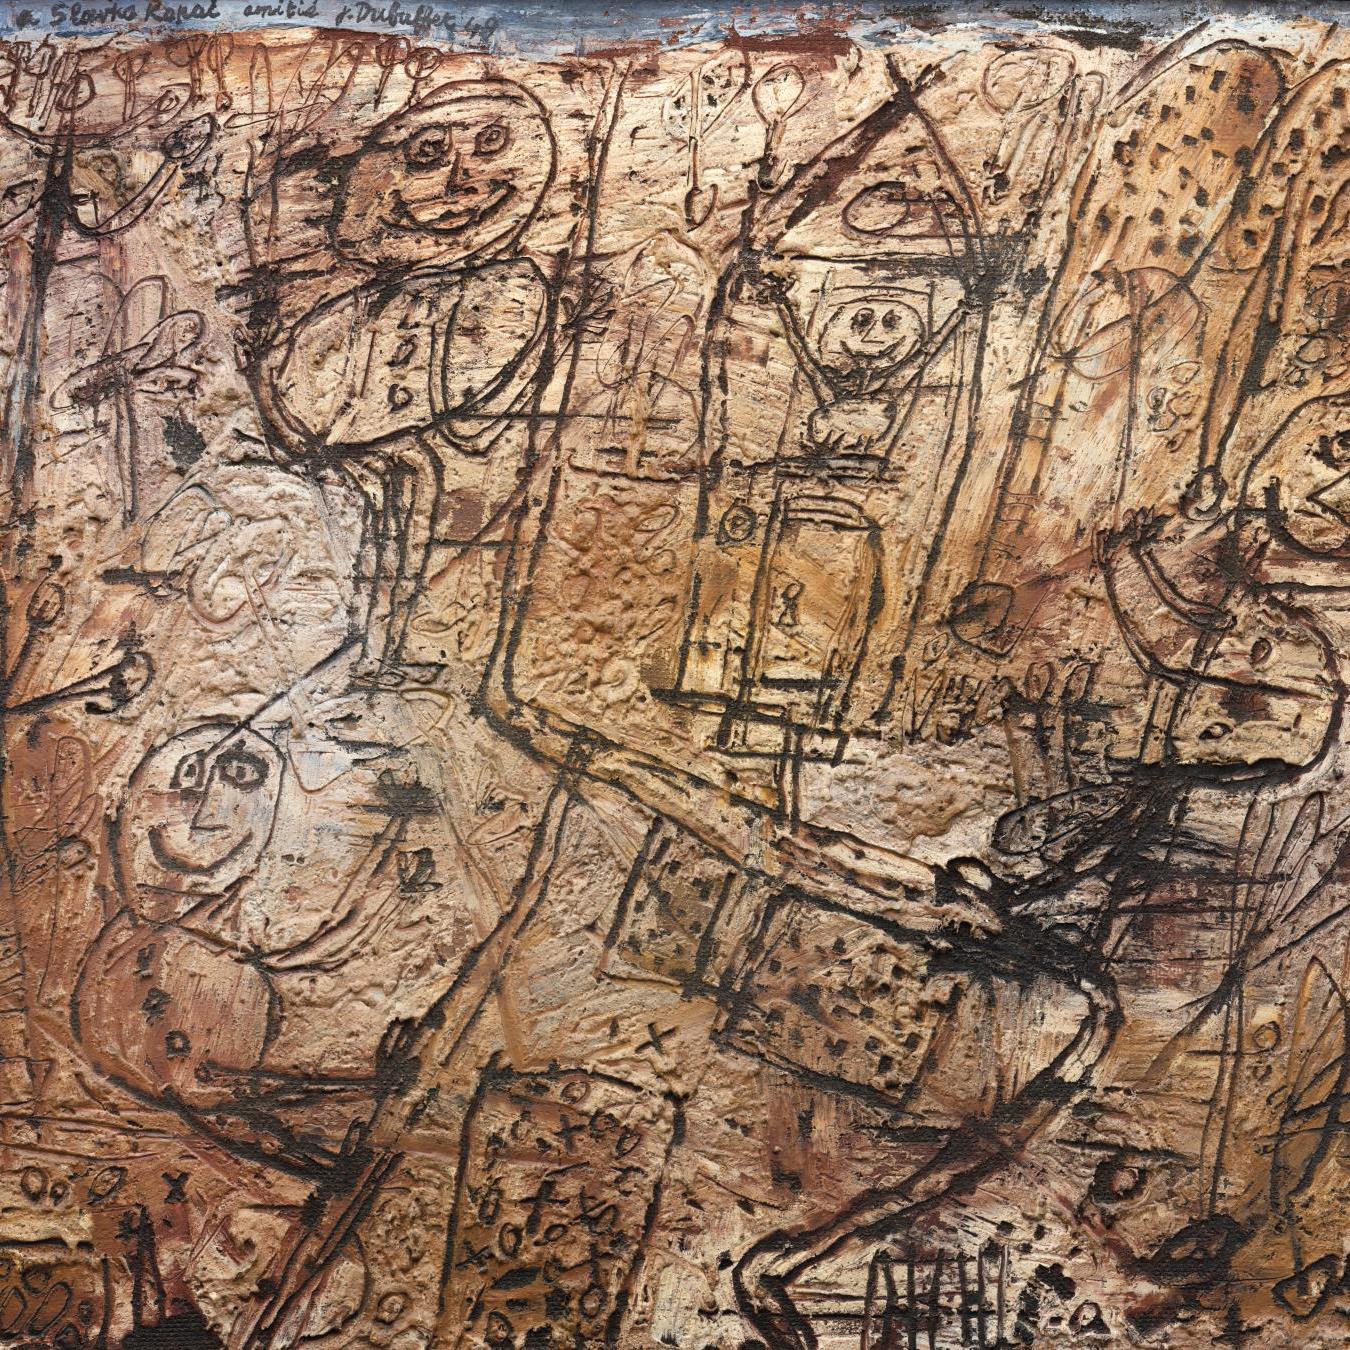 Dubuffet and Kopac: An Obsession with Material - Lots sold